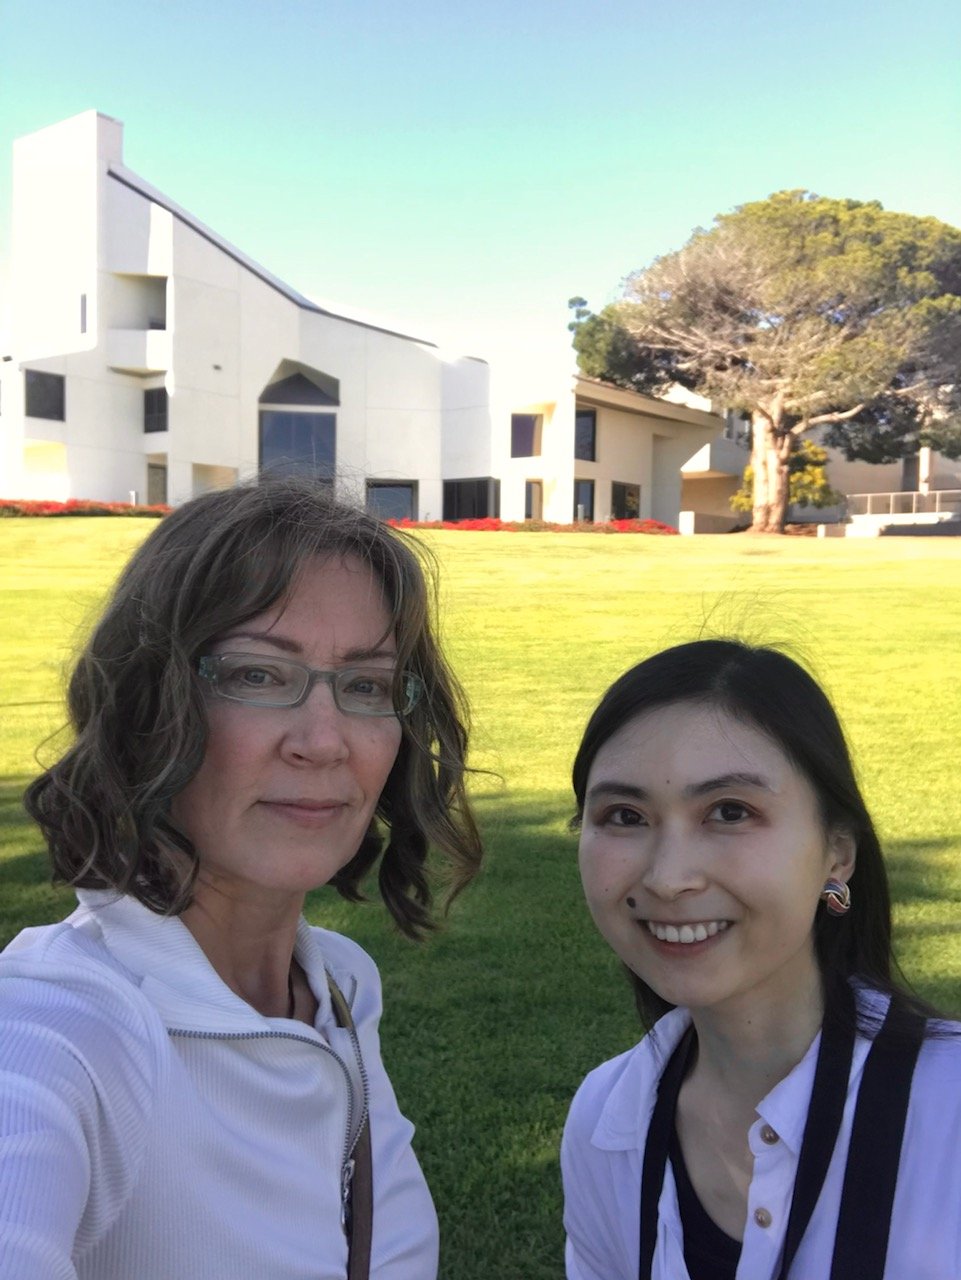  Mira and Rika at UCSB, Faculty Club in background 